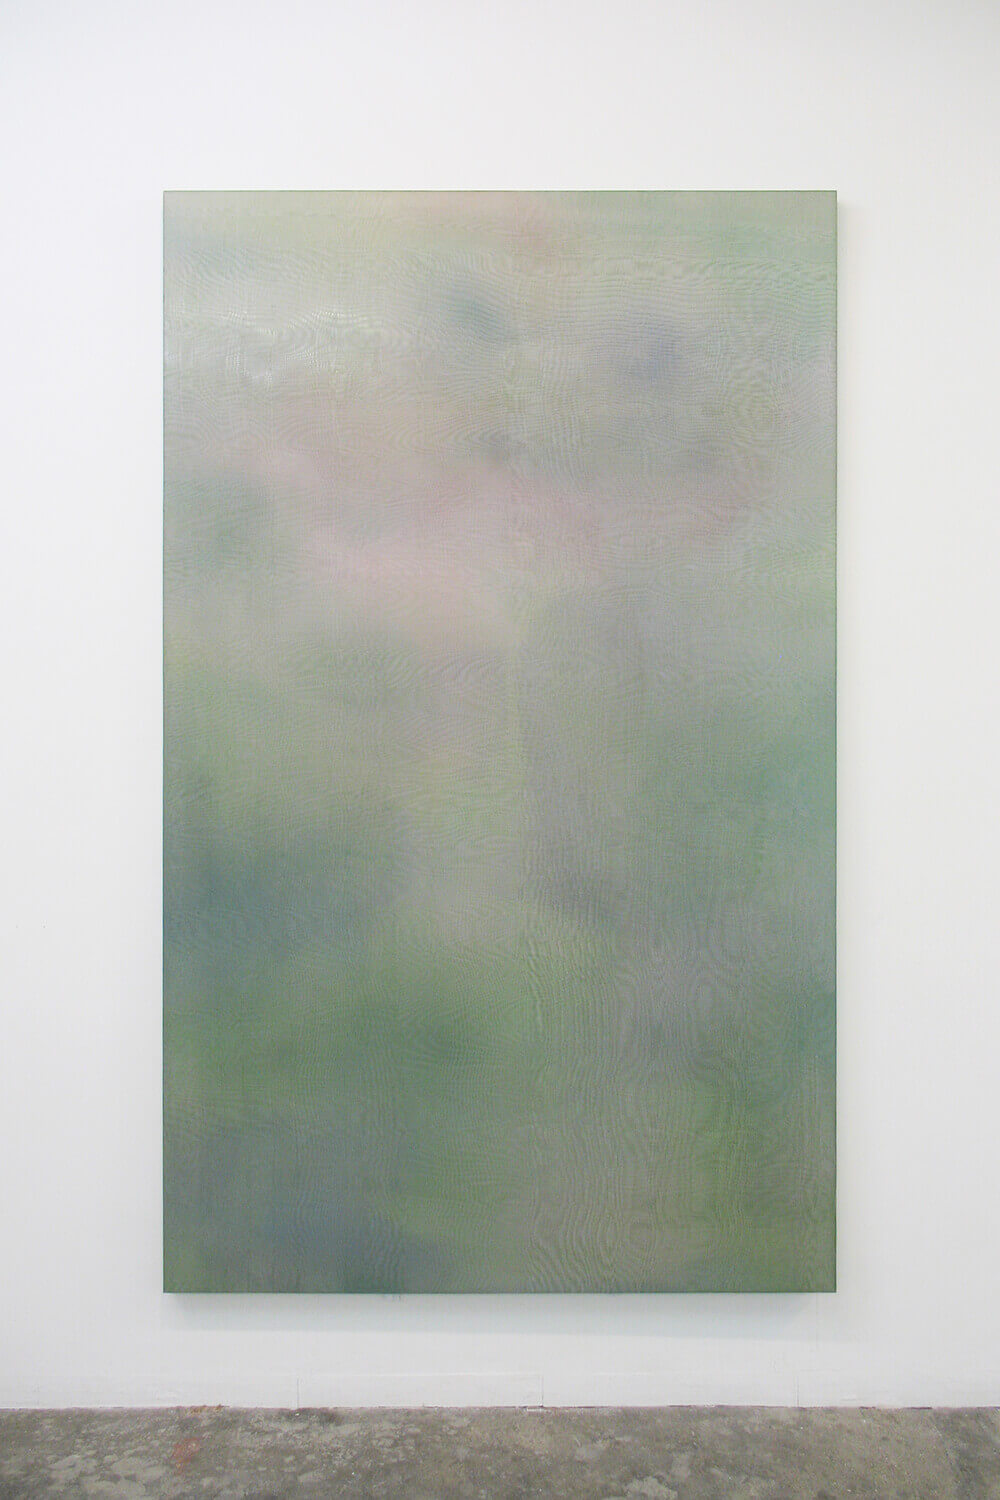 Untitled<br>
Acrylic, glass organdy, stainless steel, panel 200 x 12 cm 2012<br>
VOCA出展作